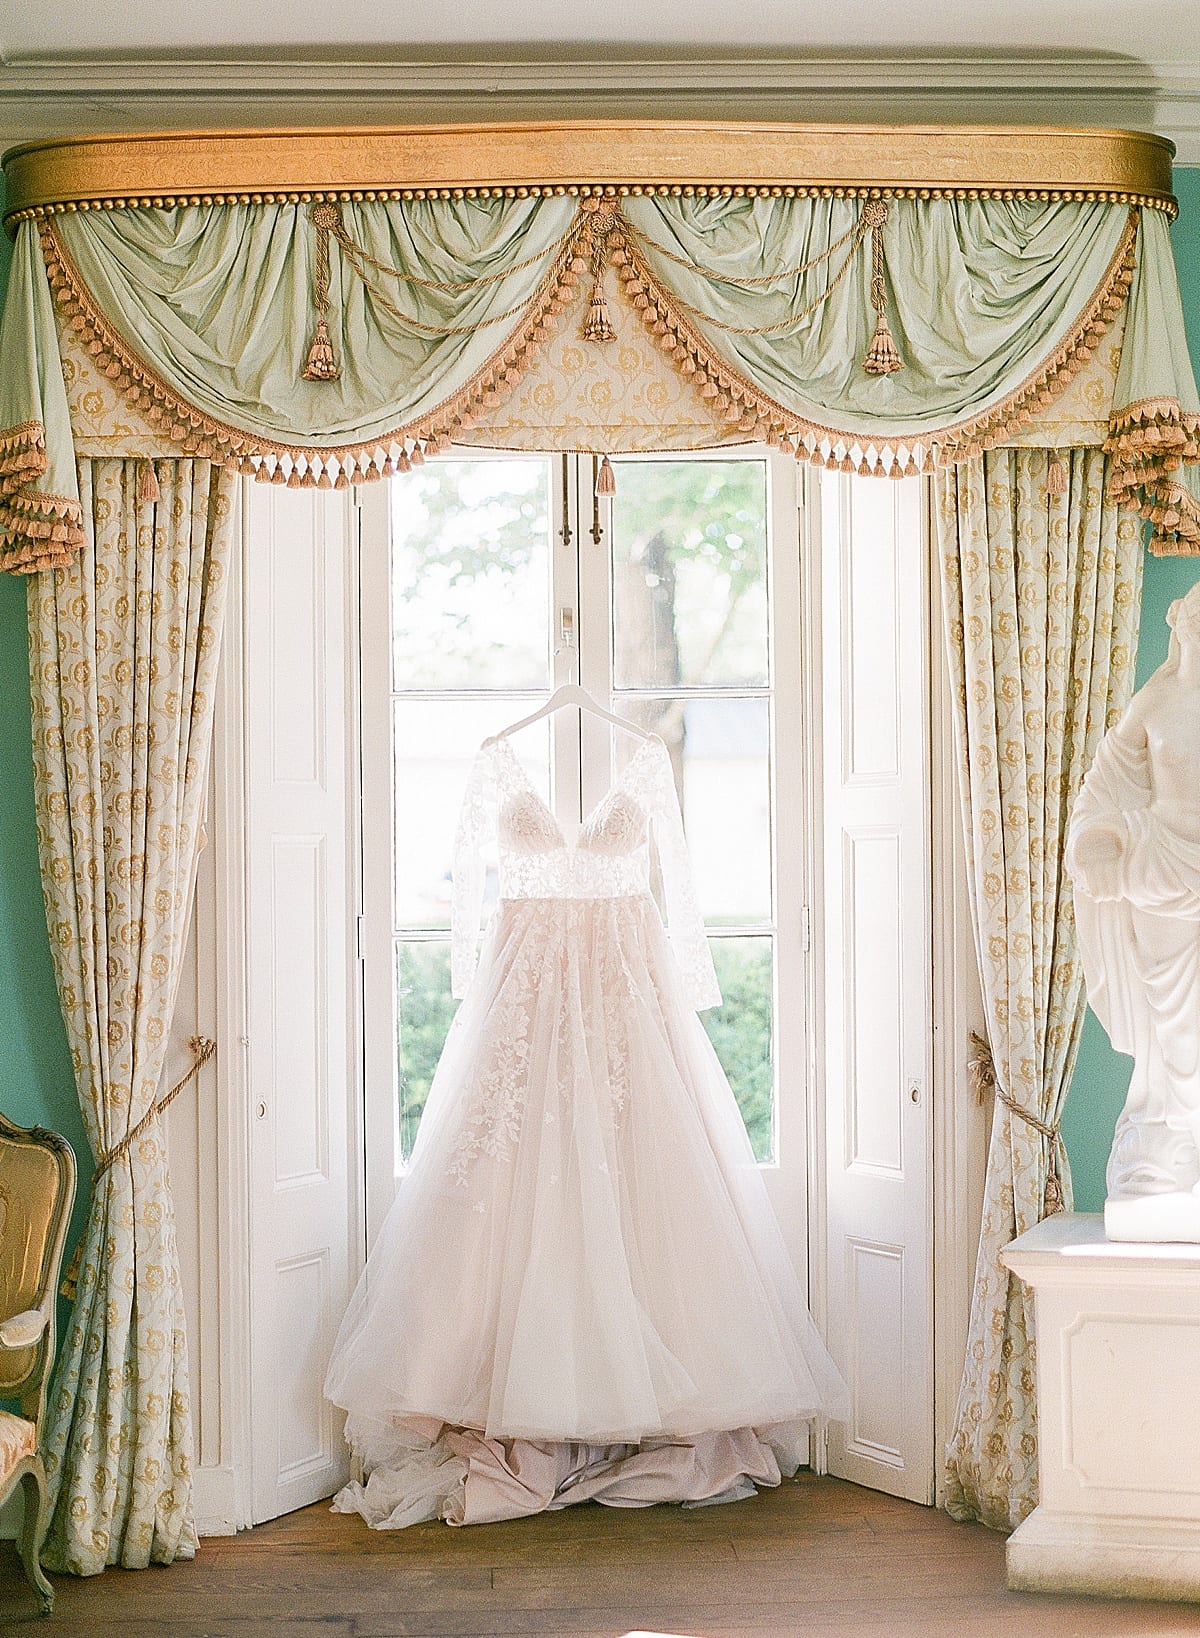 Bridal Gown Hanging in Window Photo